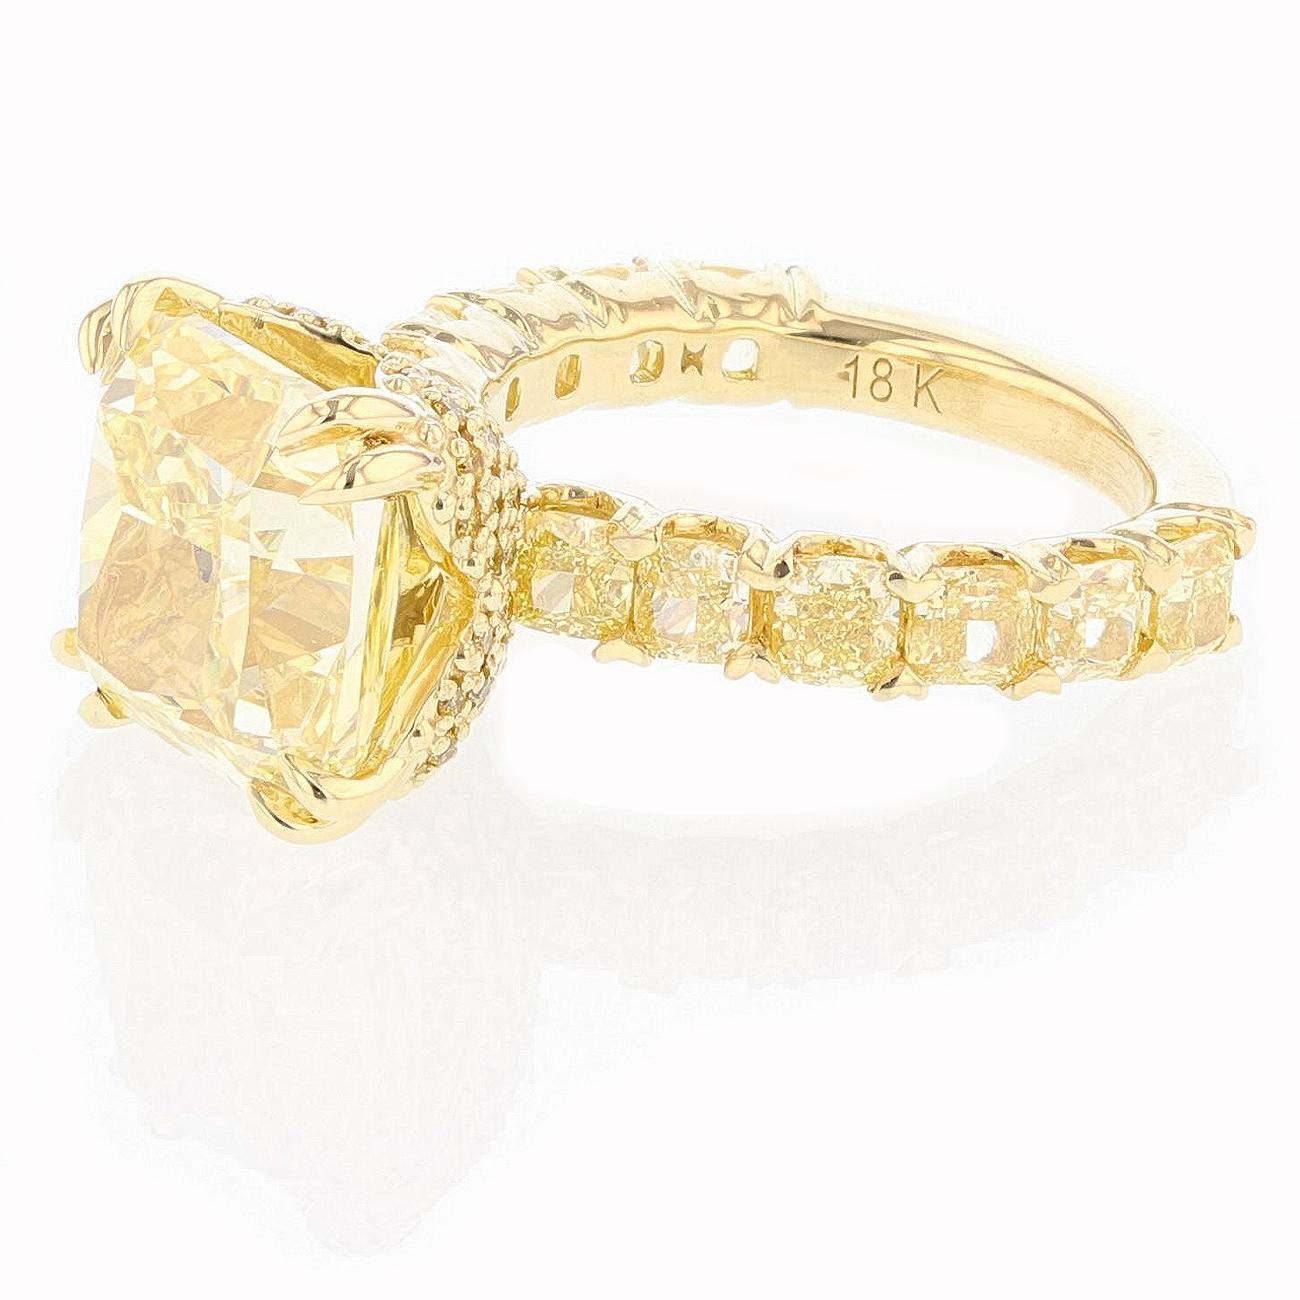 This ring is made in 18K yellow gold and features a 8.03ct Fancy Yellow Cushion cut Diamond clarity grade VVS2 with GIA certificate # 6193658610. The ring features 12 cushion cut diamonds weighing 2.63 ct Color Grade (Fancy Yellow) Clarity Grade